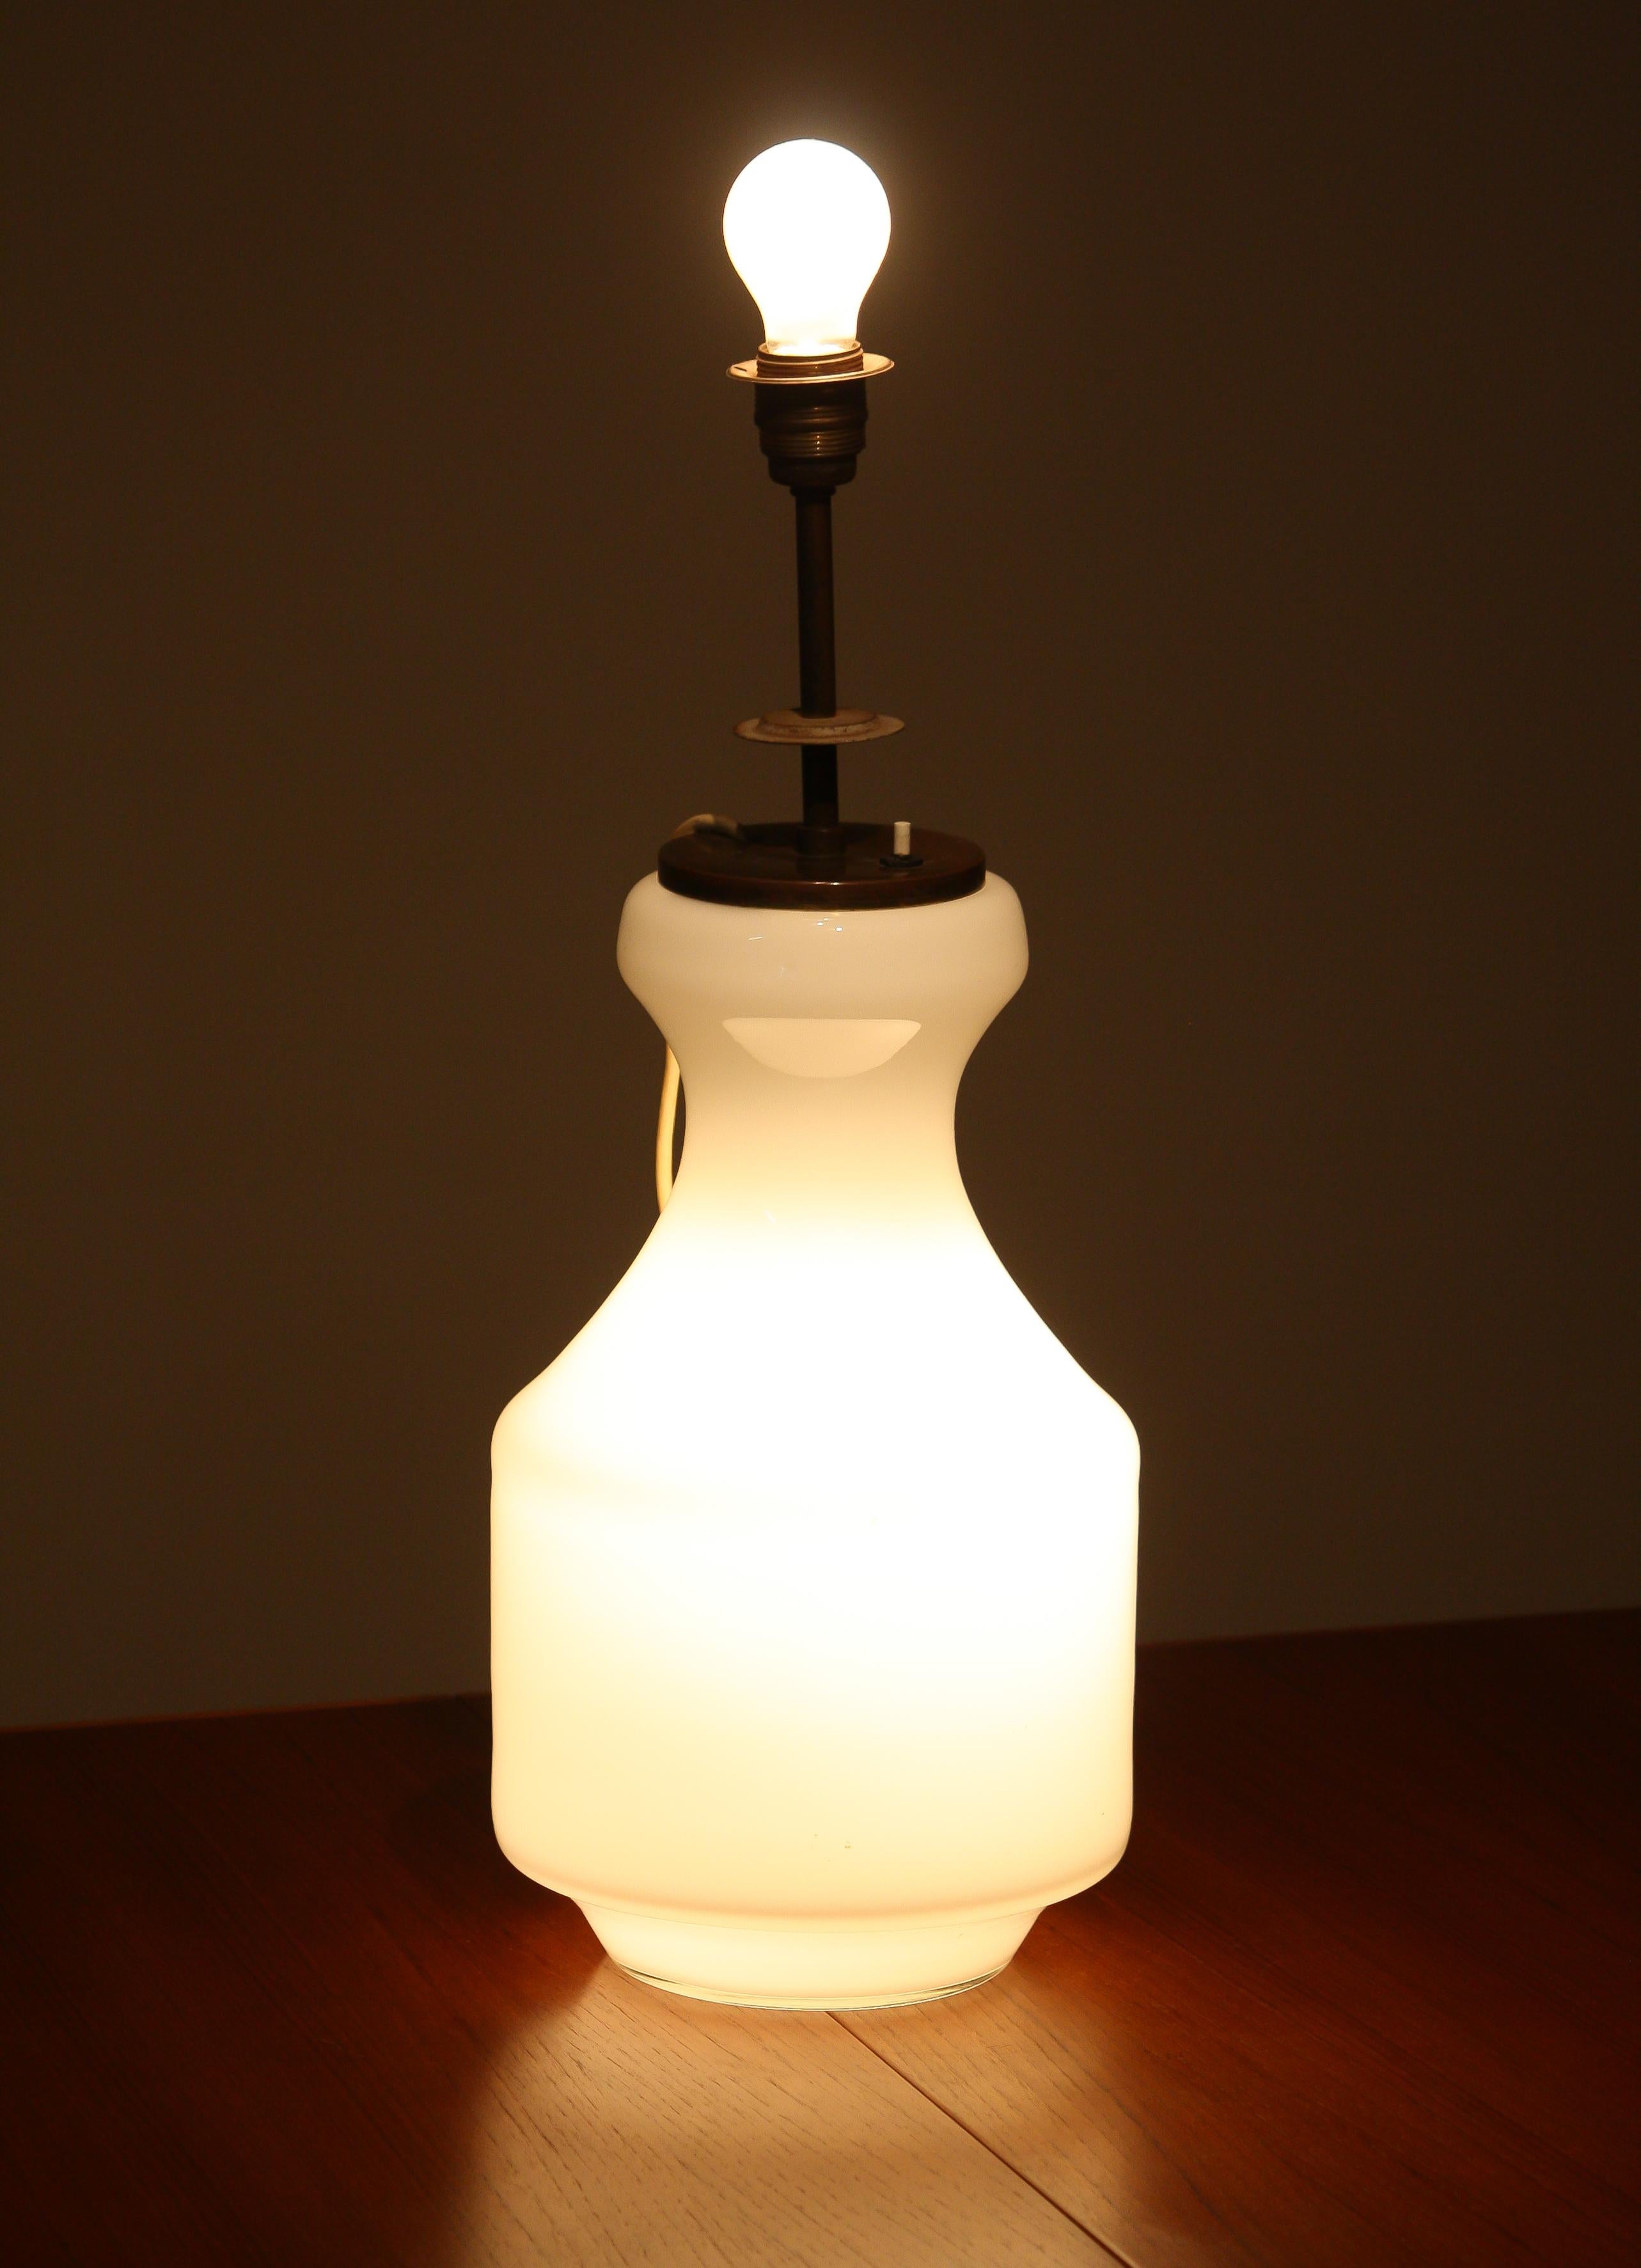 Mid-Century Modern 1950s, White Glass Vase Table or Floor Lamp with Internal Lighting by Murano